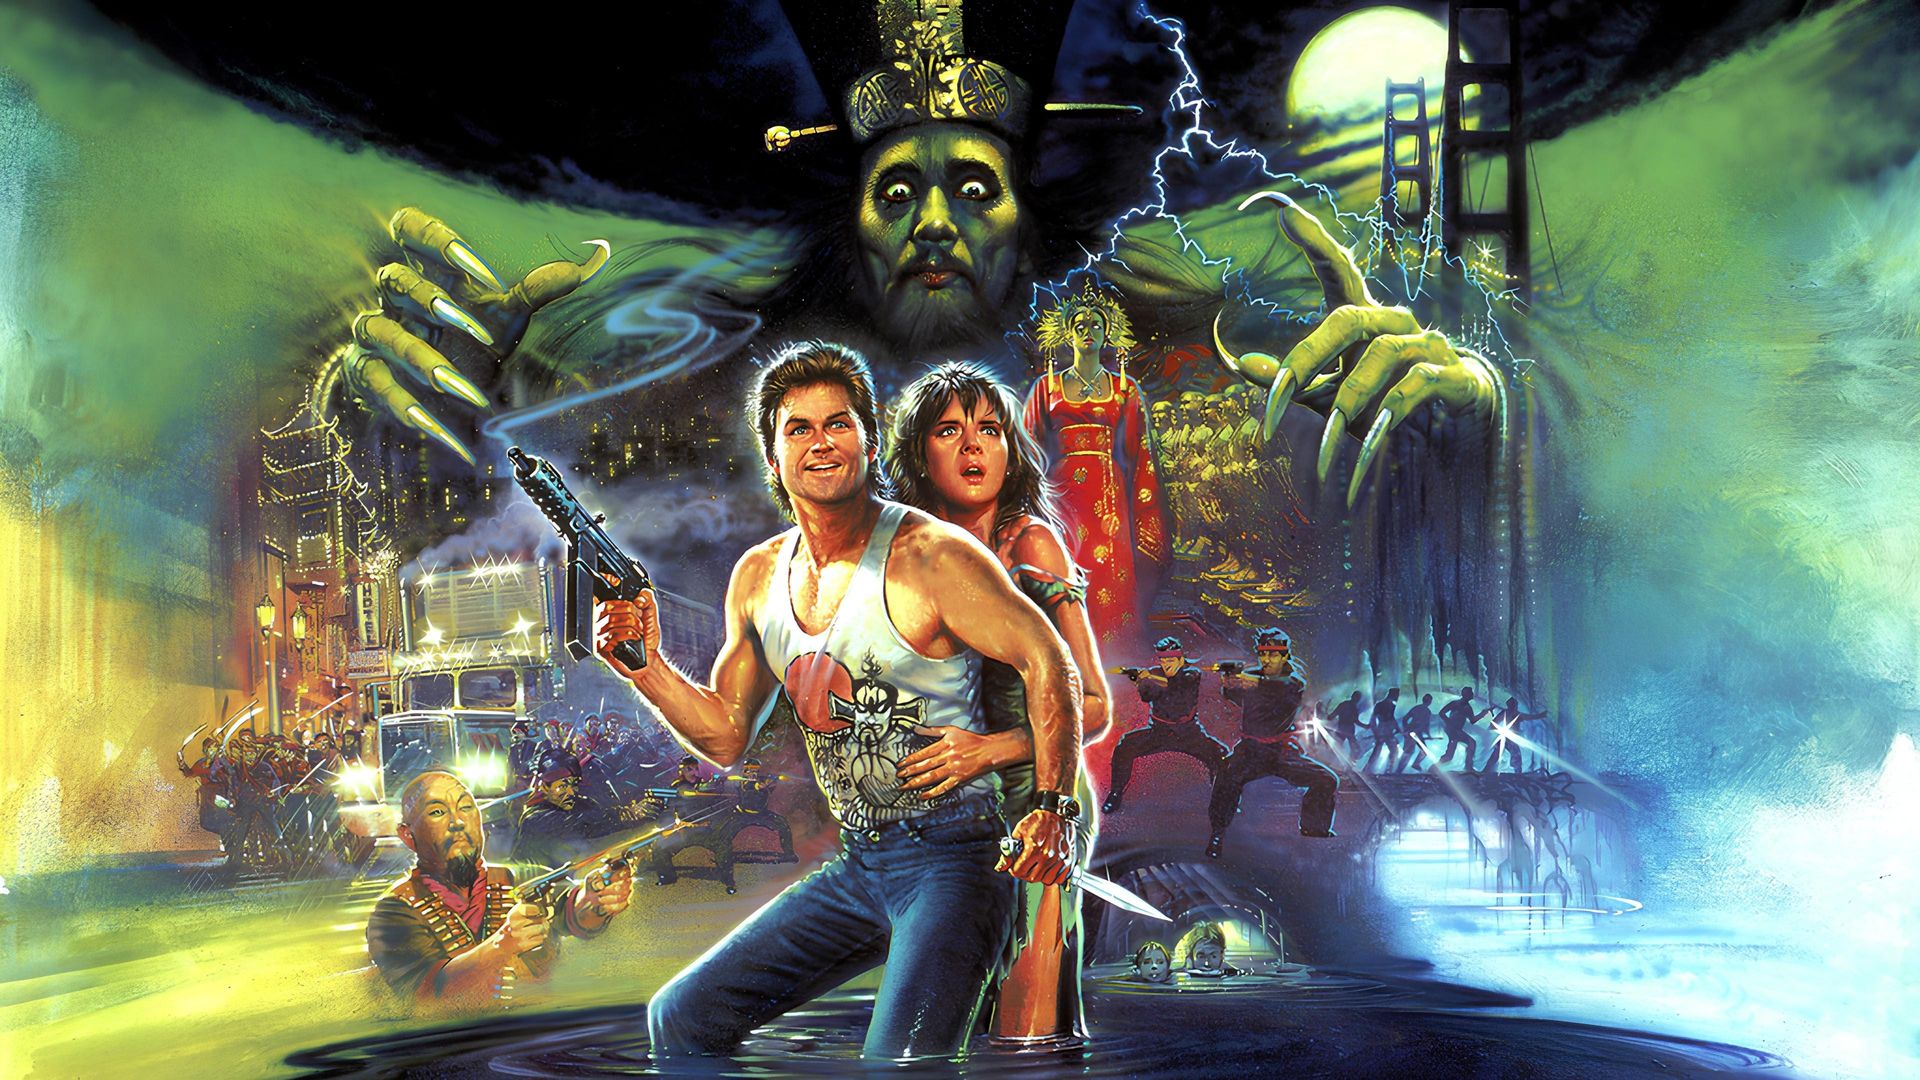 Big Trouble in Little China Backdrop